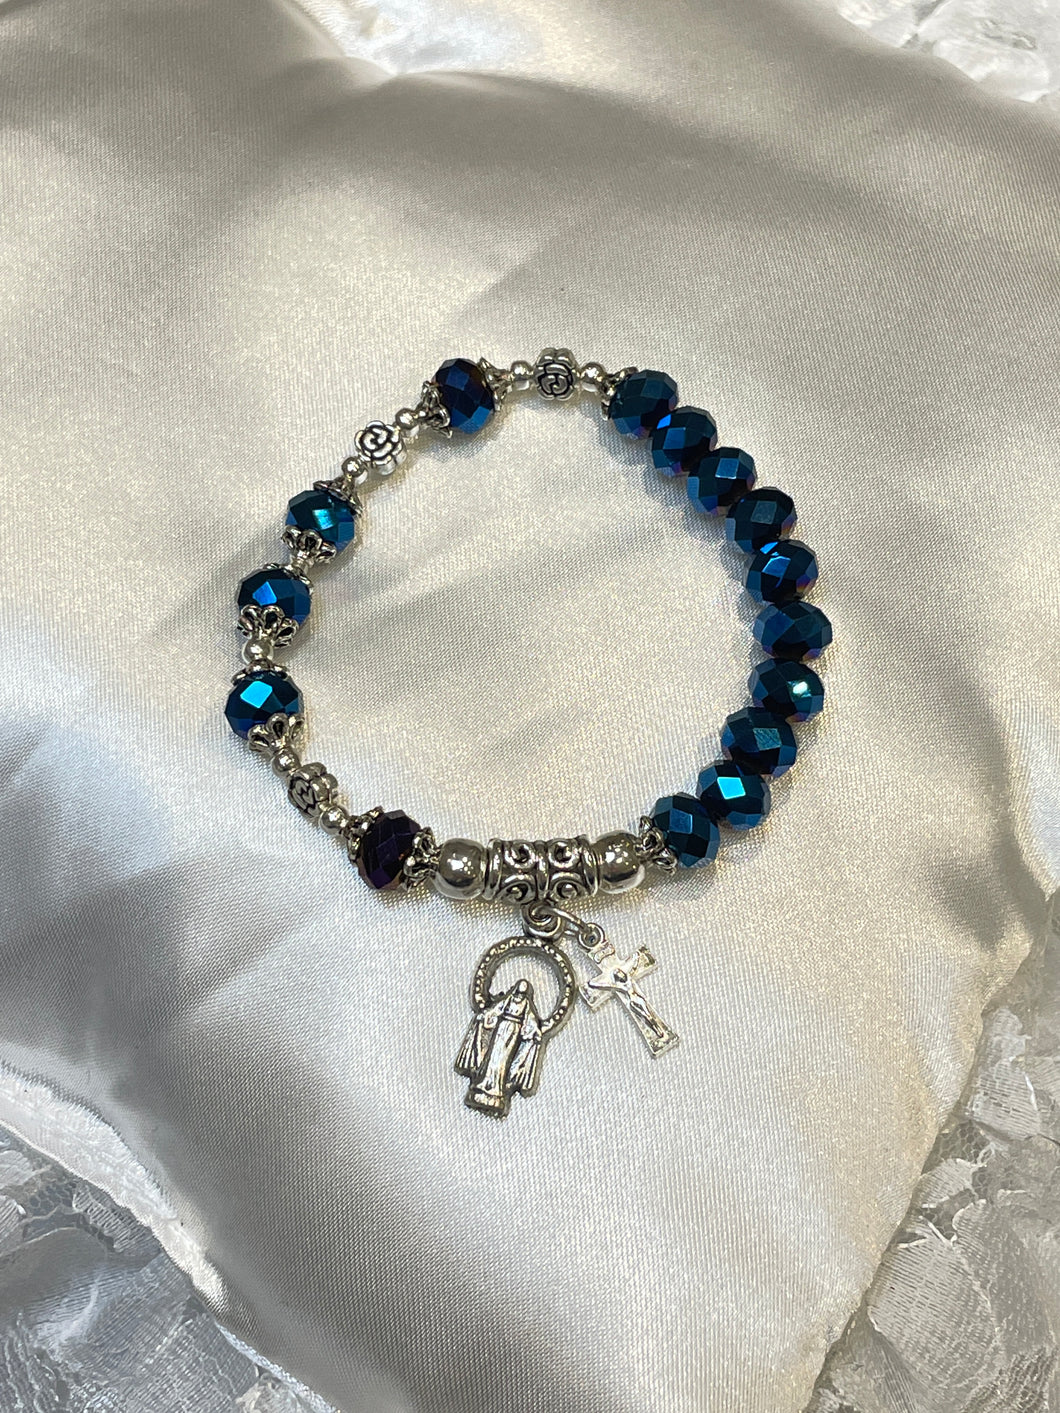 Dark Blue Crystal Rosary Bracelet with Our Lady of Grace and Crucifix Charms